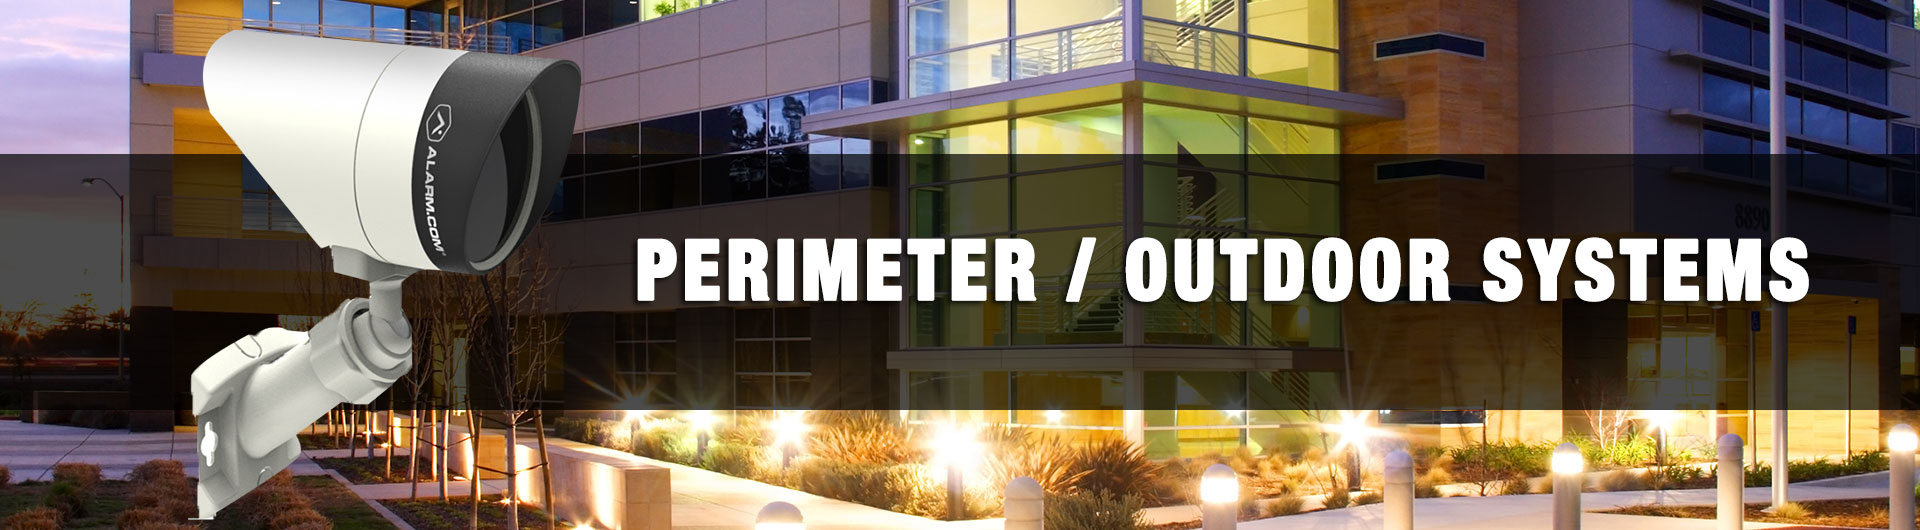 perimeter outdoor systems